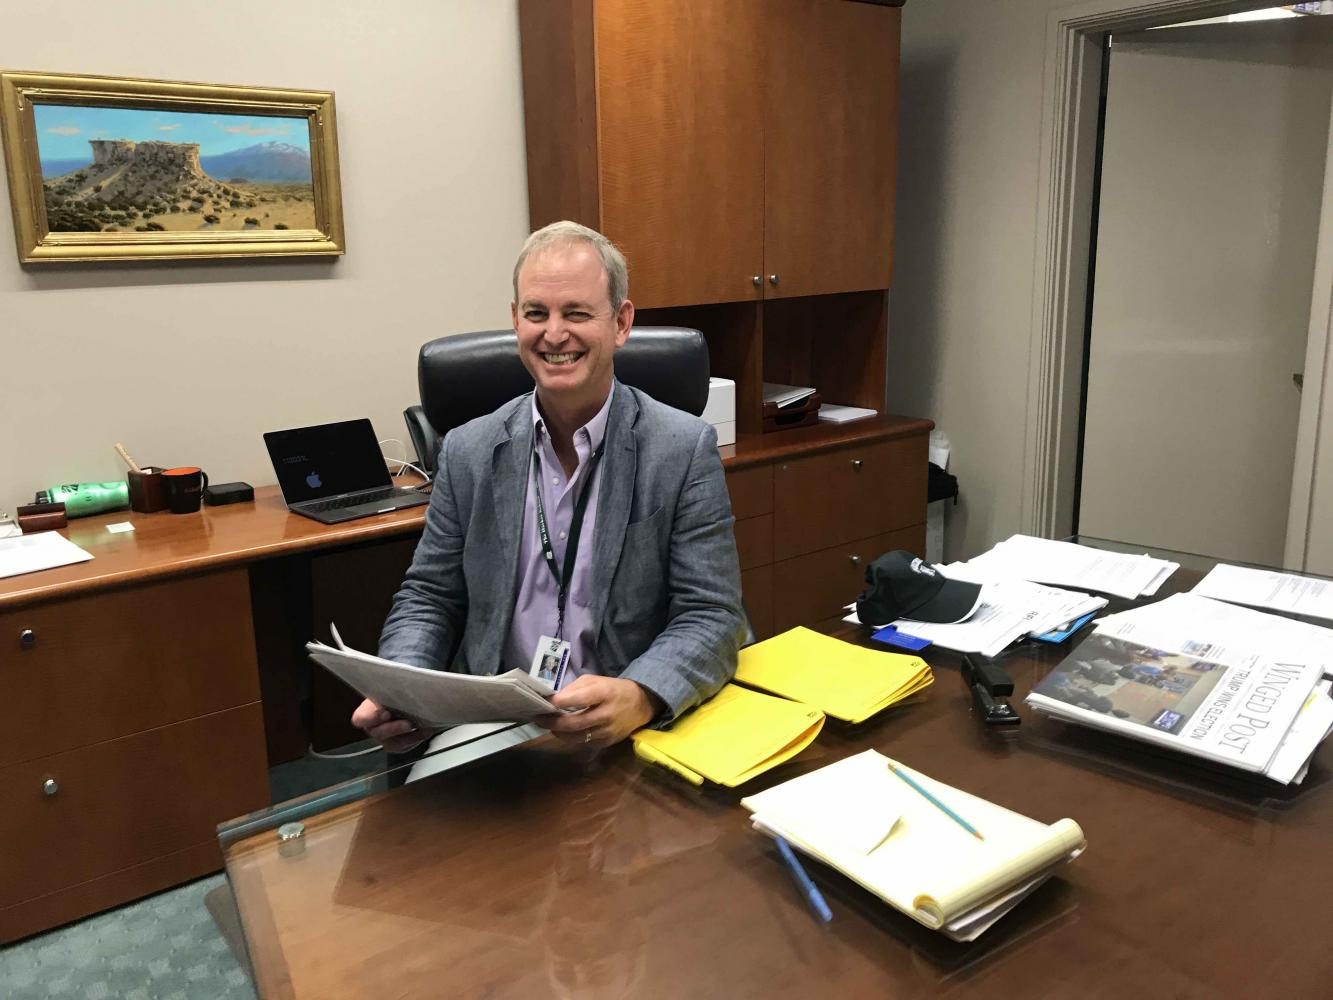 Head of School Brian Yager reads a copy of the Winged Post published in the previous school year. Yager joins Harker as the new Head of School starting this year.